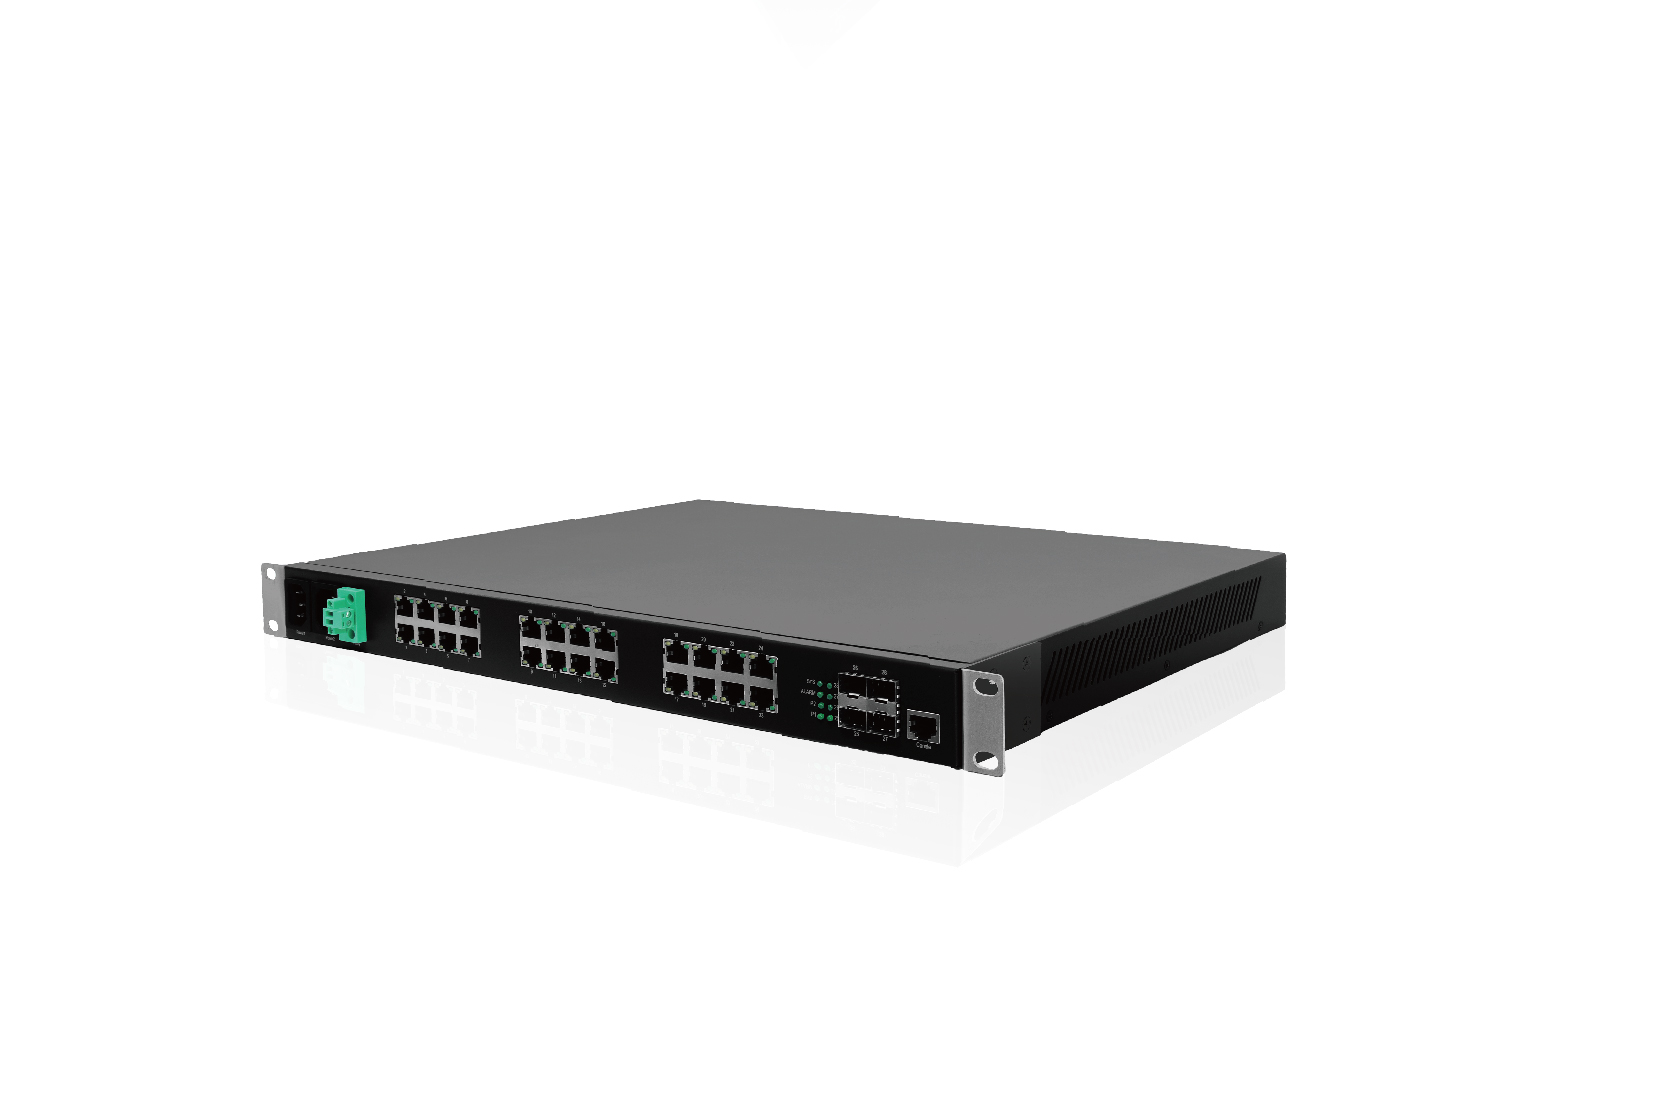 Rack type industrial grade network management switch